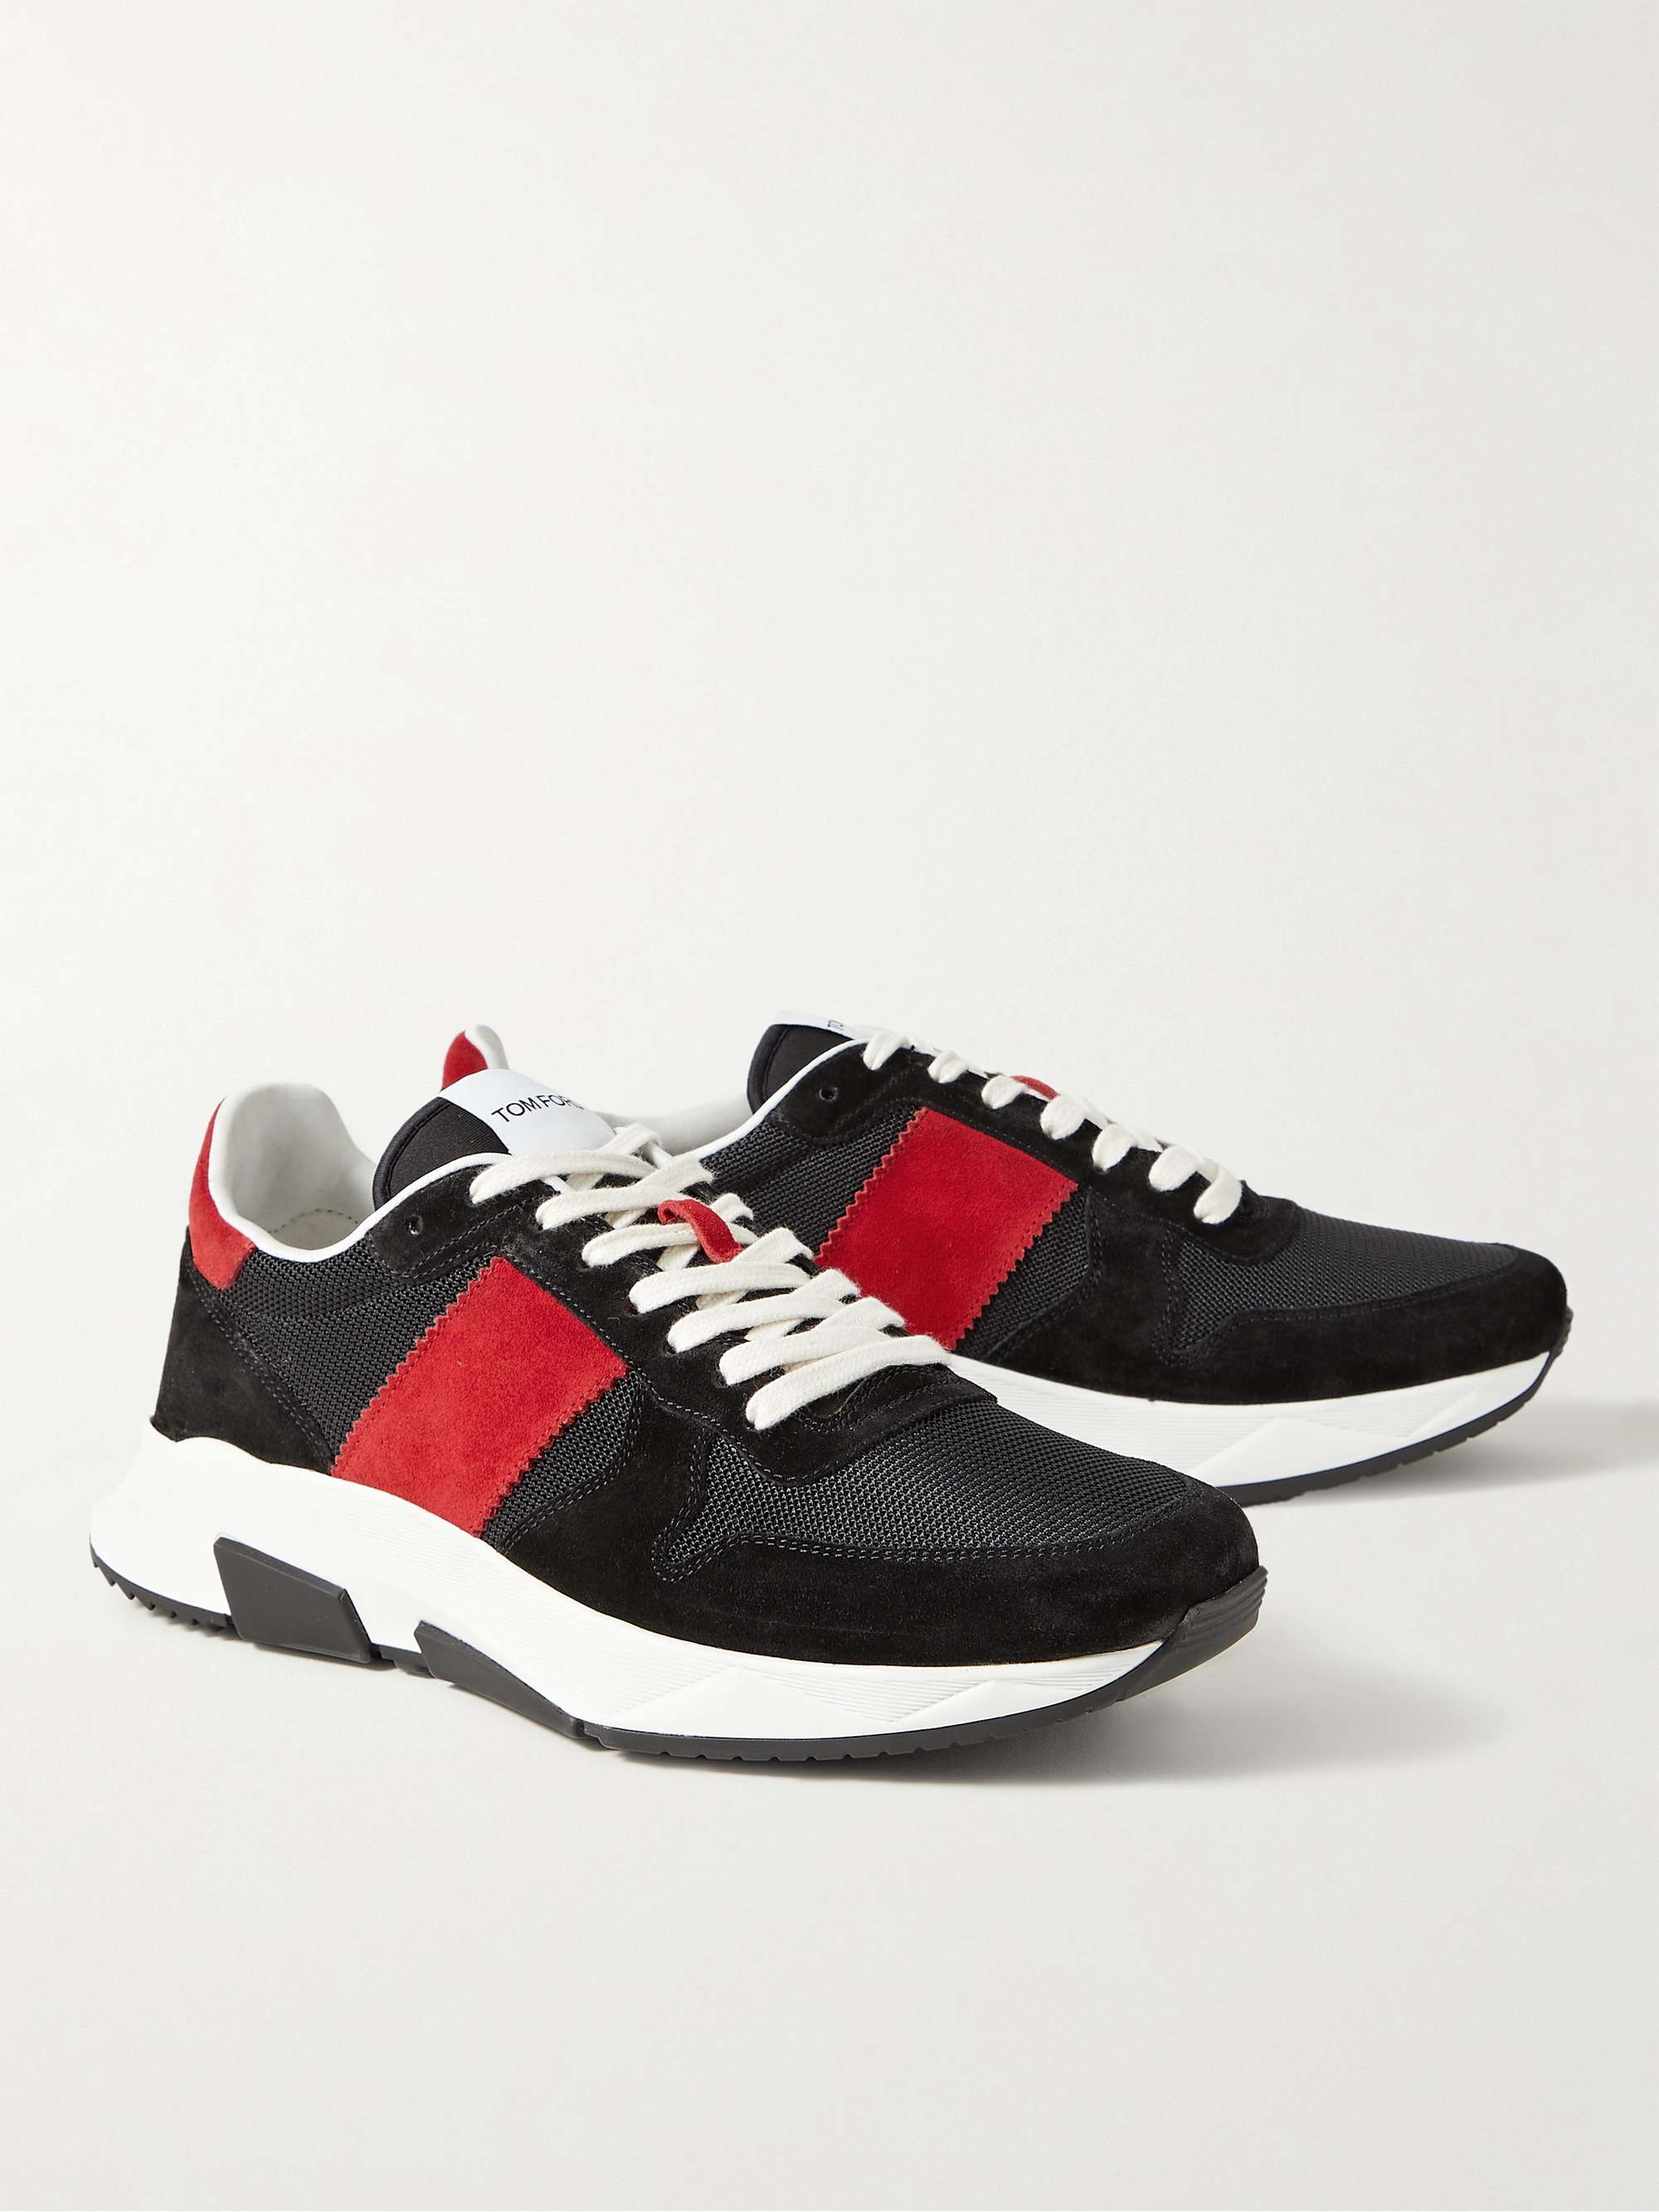 Black Jagga Suede and Mesh Sneakers | TOM FORD | MR PORTER